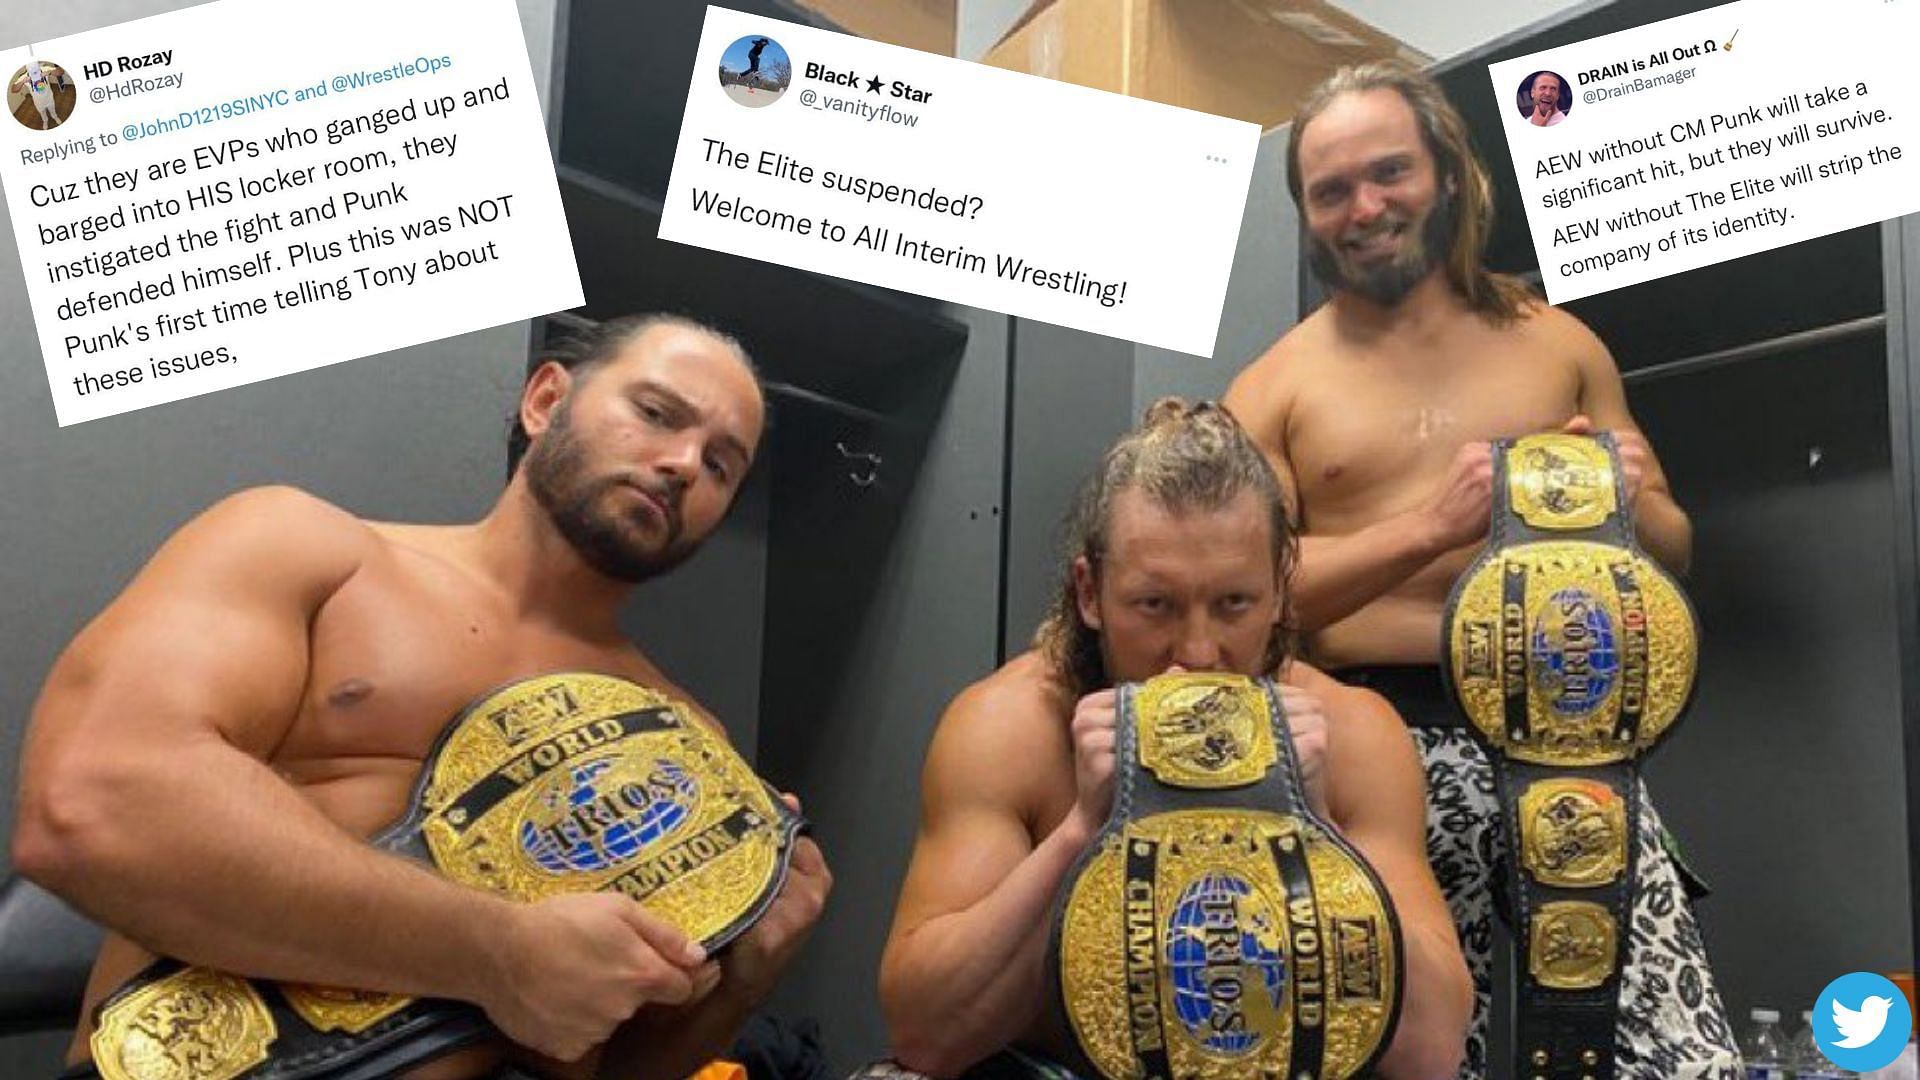 Twitter has reacted to The Elite being suspended